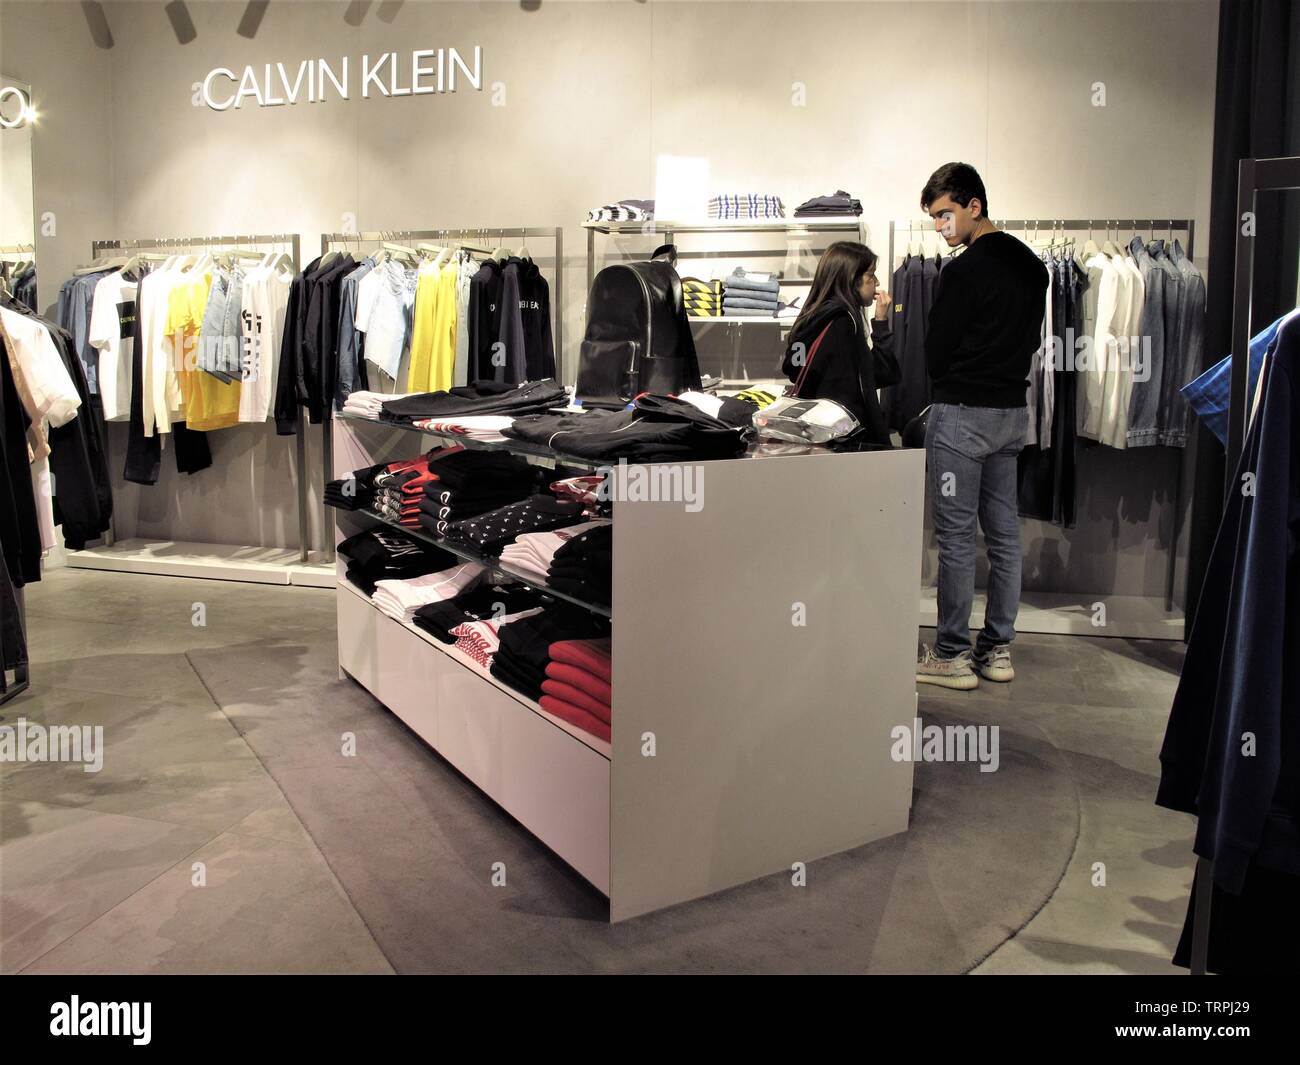 Calvin Klein clothing at the Rinascente fashion in Rome Stock Photo - Alamy